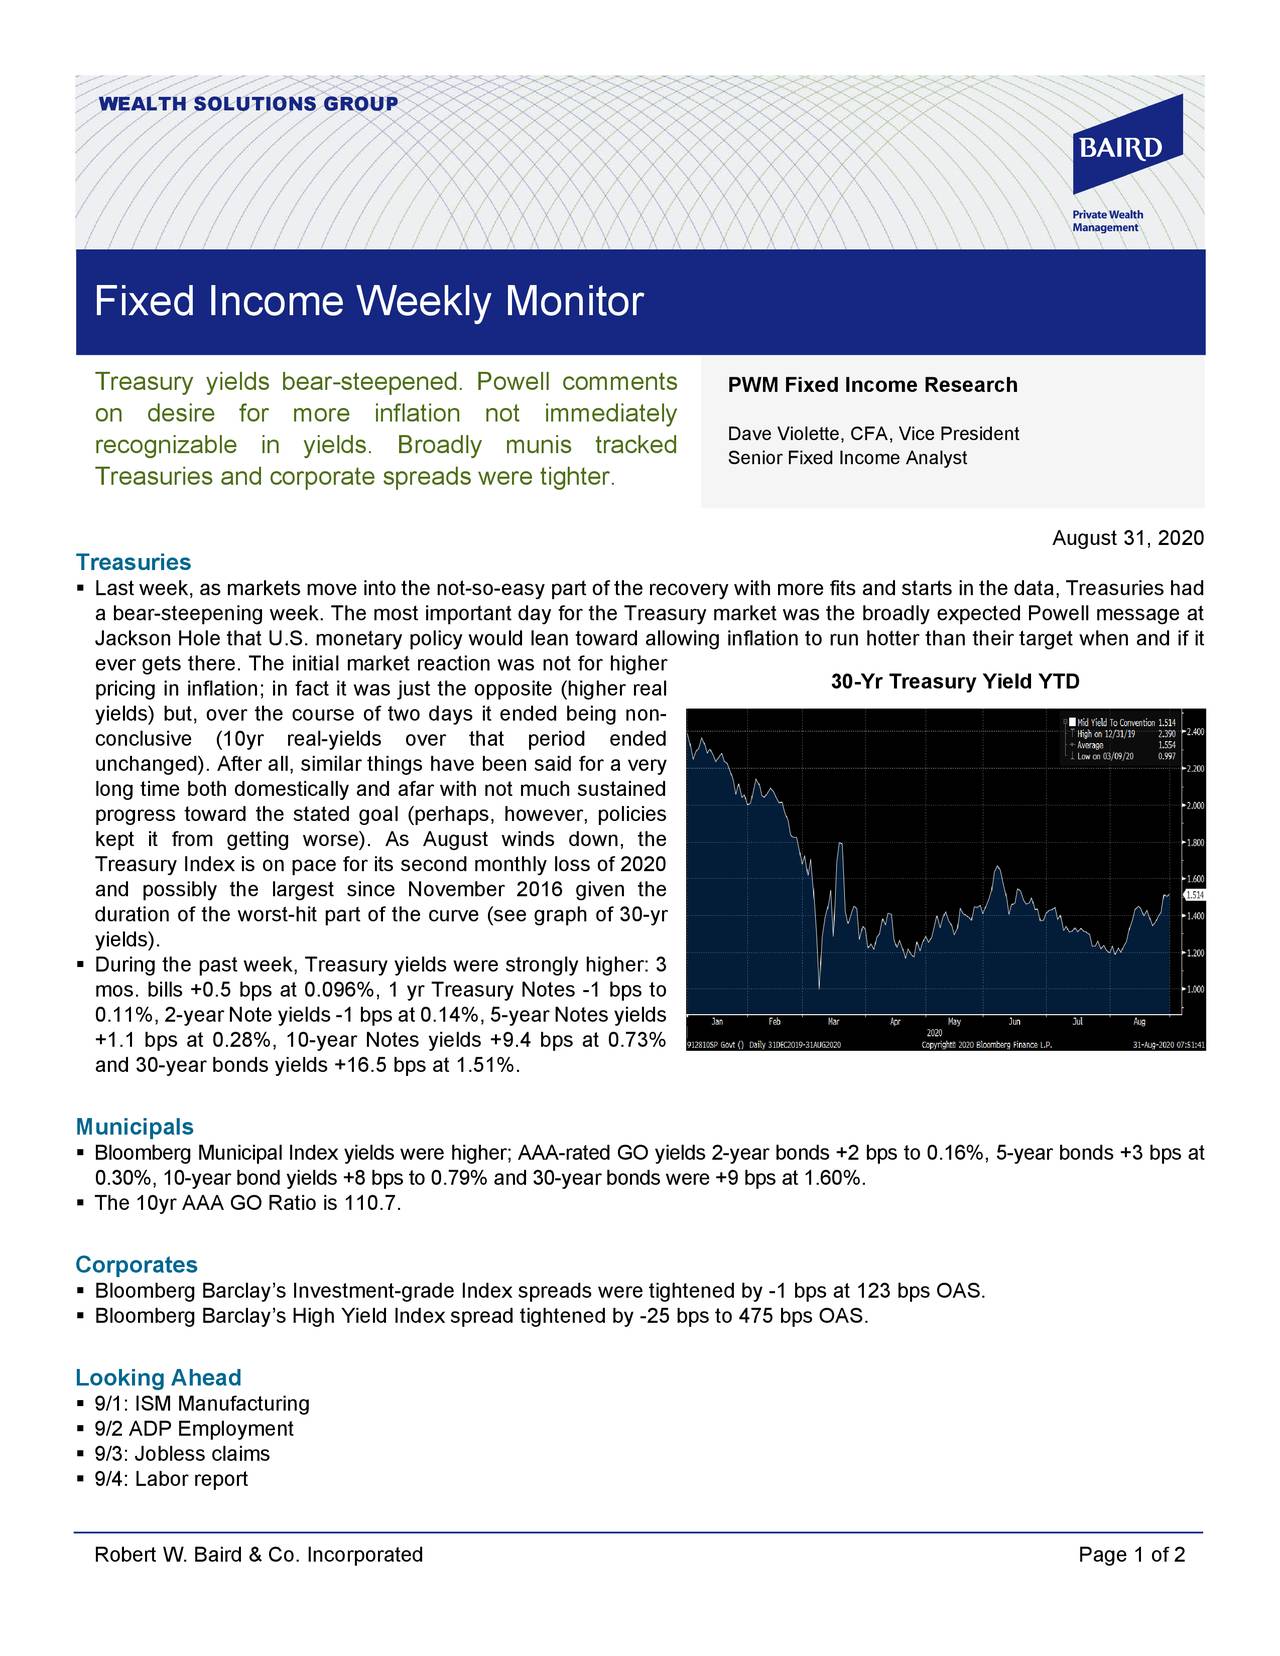 Treasuries Had A Bear-Steepening Week: Fixed Income Weekly Monitor, August 31, 2020